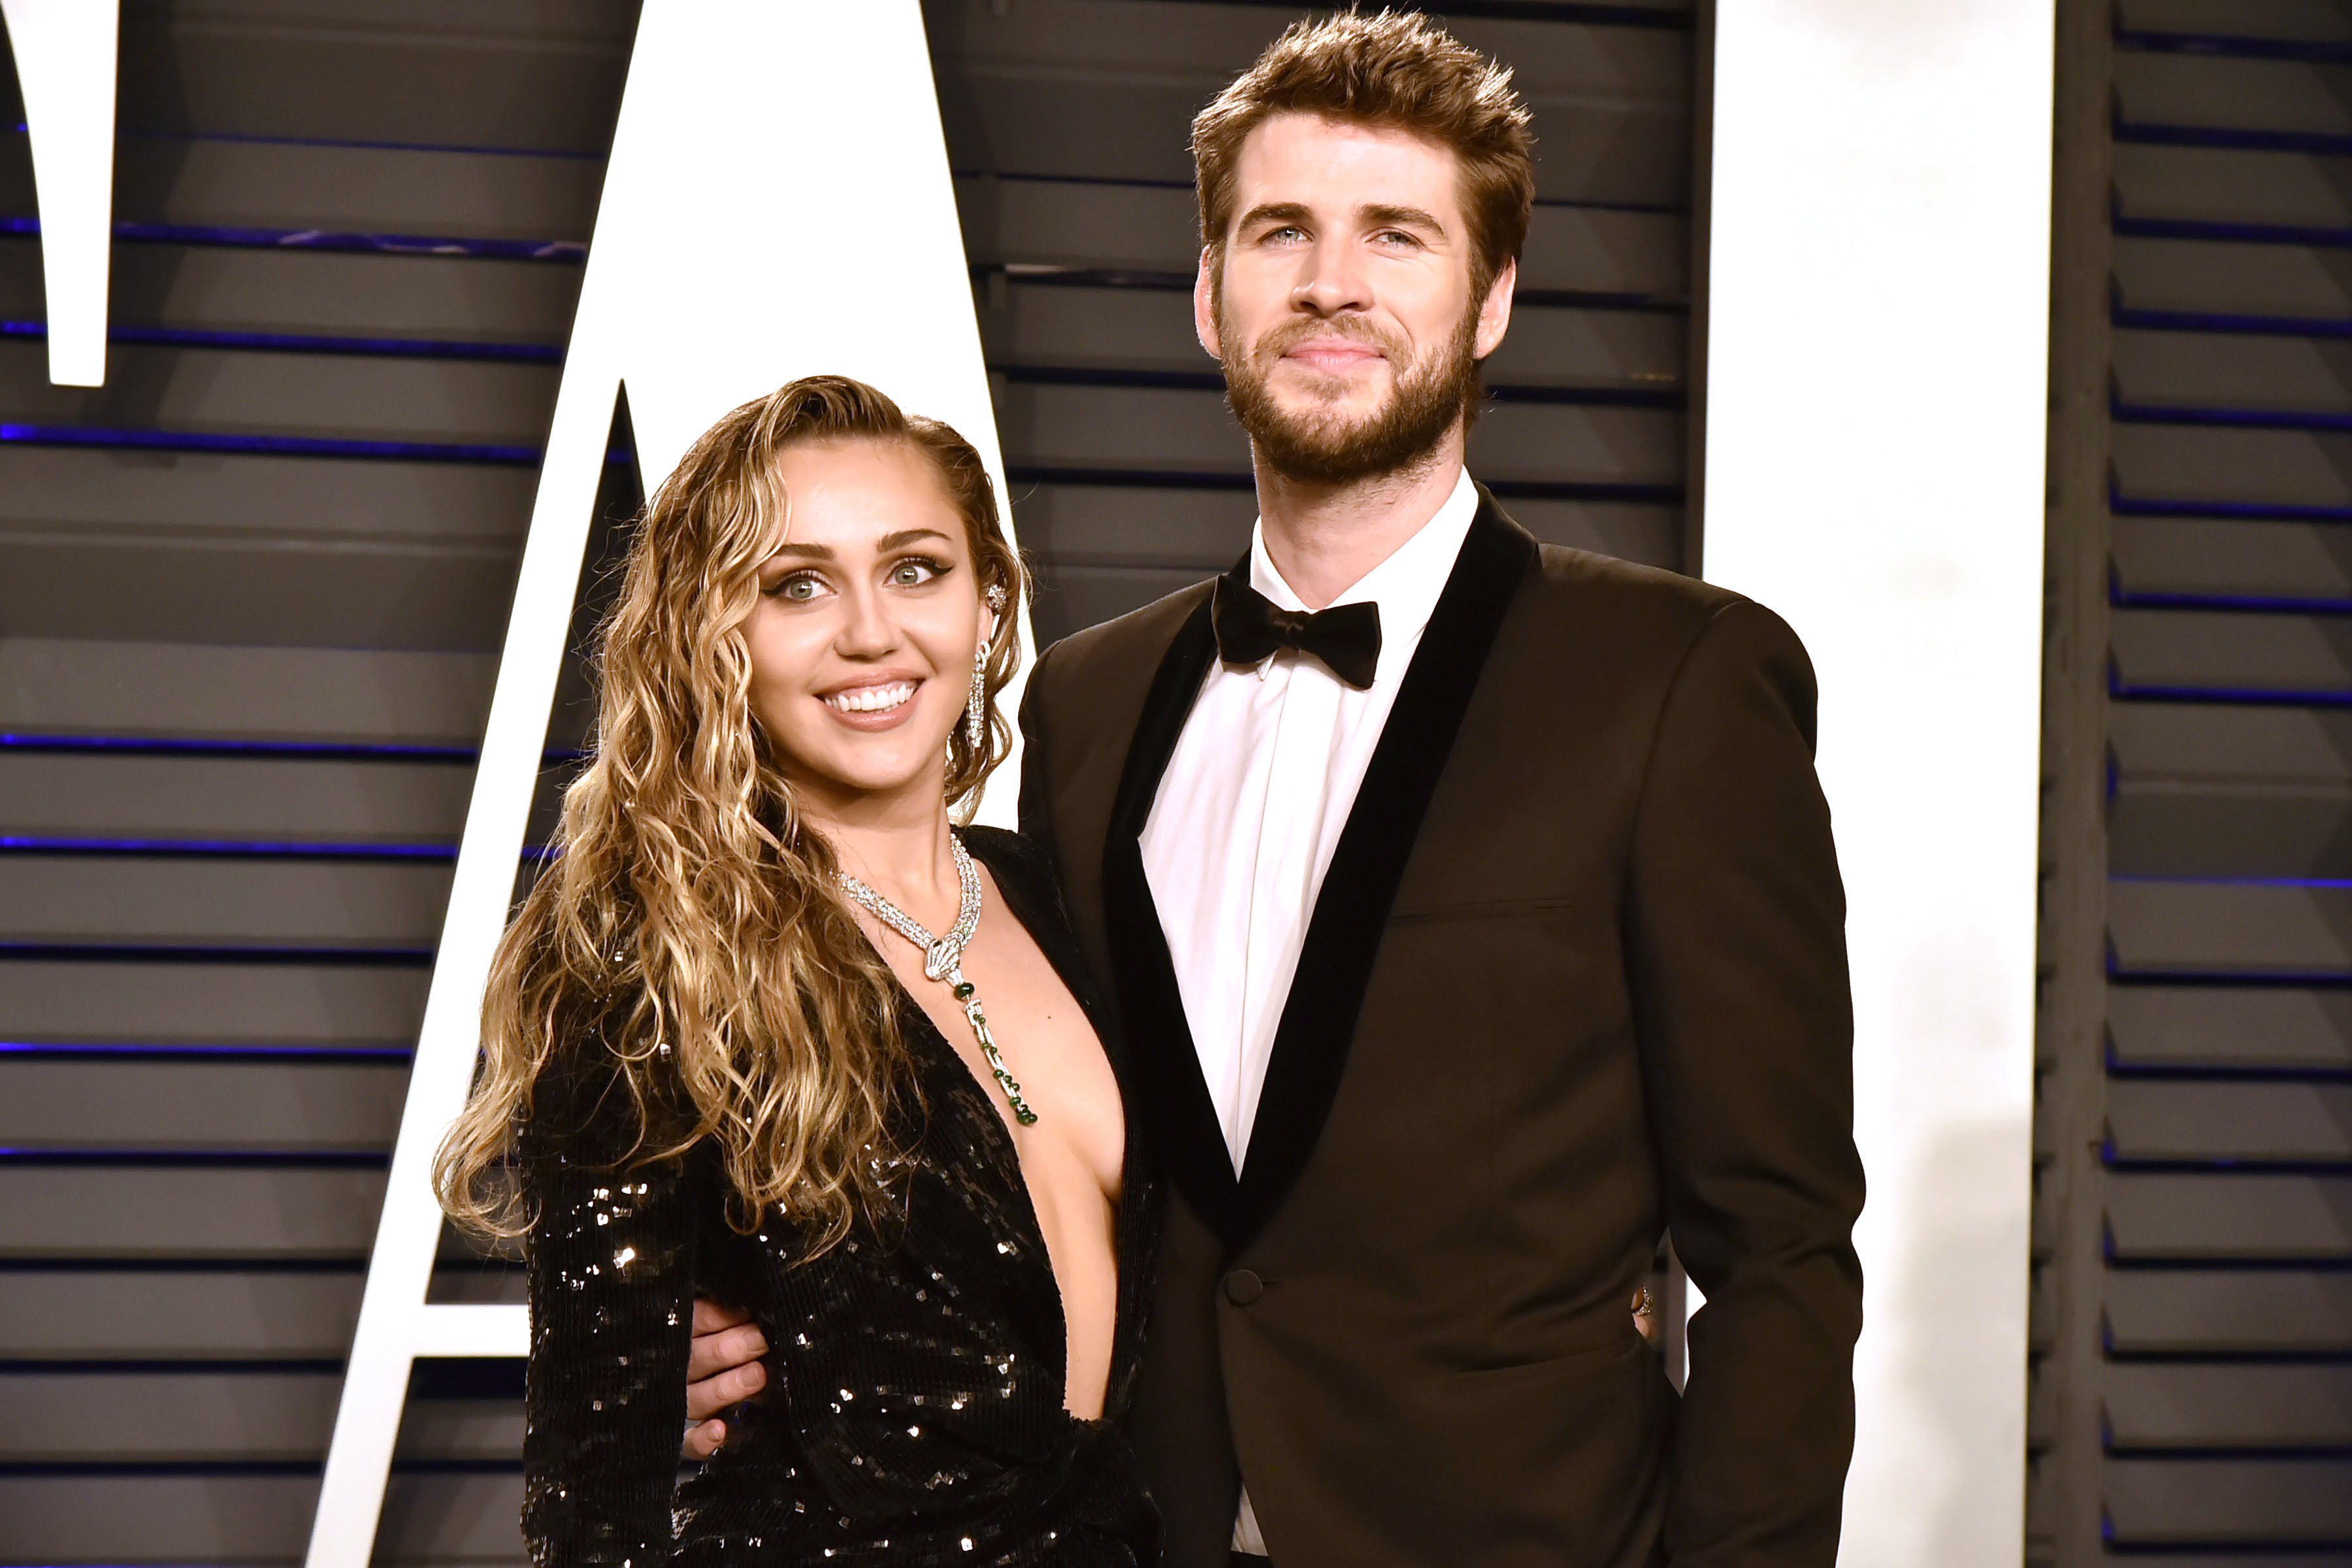 Liam Hemsworth and Miley Cyrus attend the 2019 Vanity Fair Oscar Party on February 24, 2019 in Beverly Hills, California.